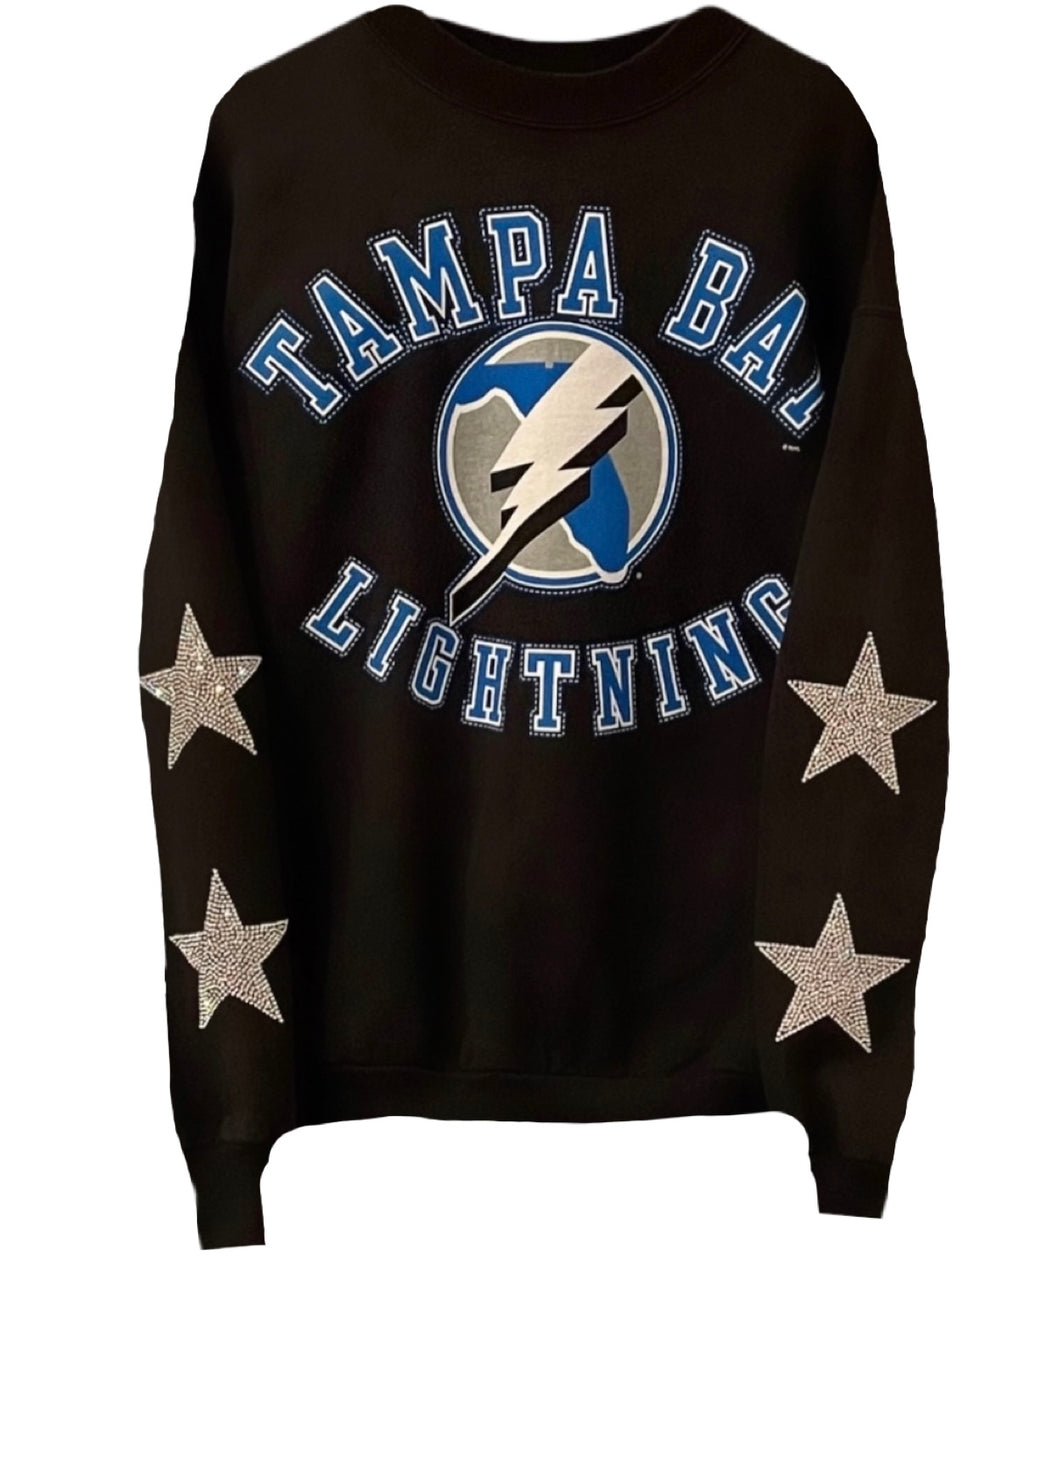 Tampa Bay Lightning, NHL One of a KIND vintage Sweatshirt with Crystal Star Design with Custom Crystal Name & Number